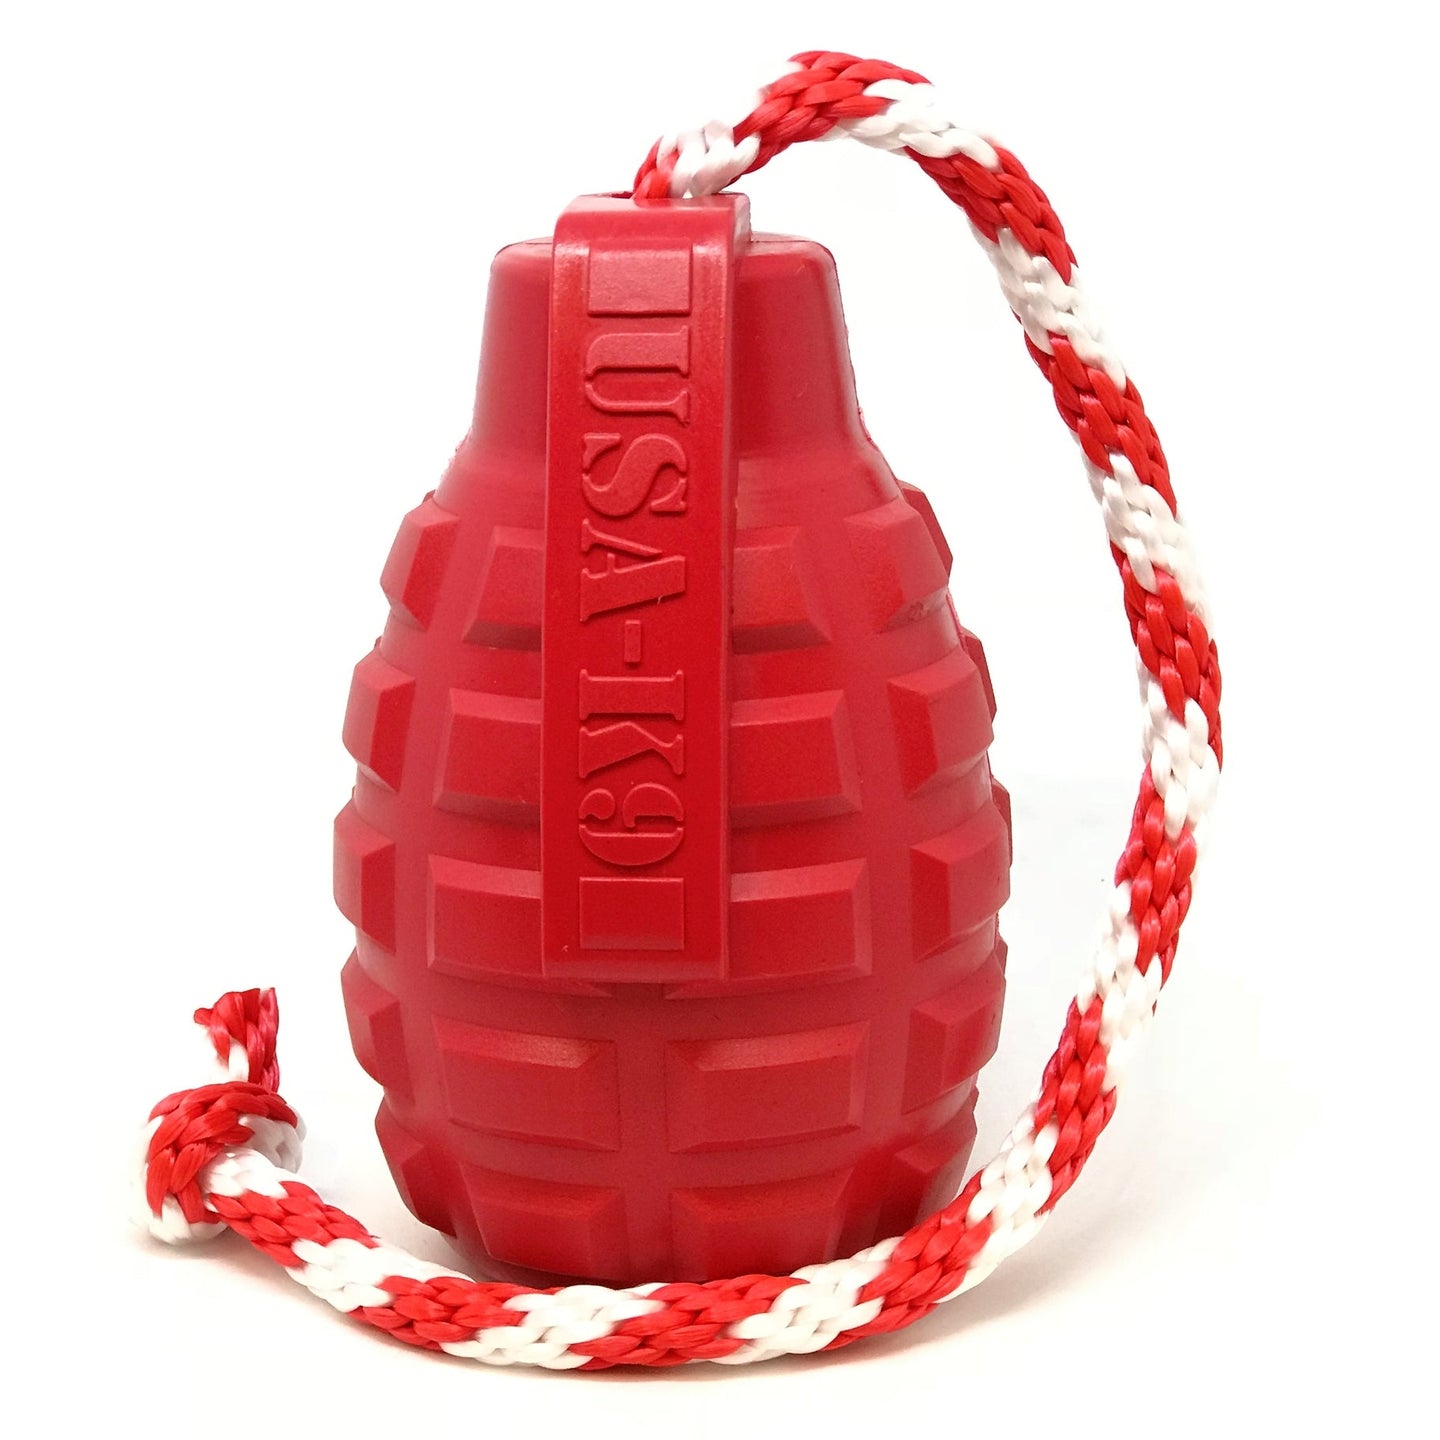 USA-K9 Magnum Grenade Large - Chew Toy - Reward Toy - Bulletproof Pet Products Inc